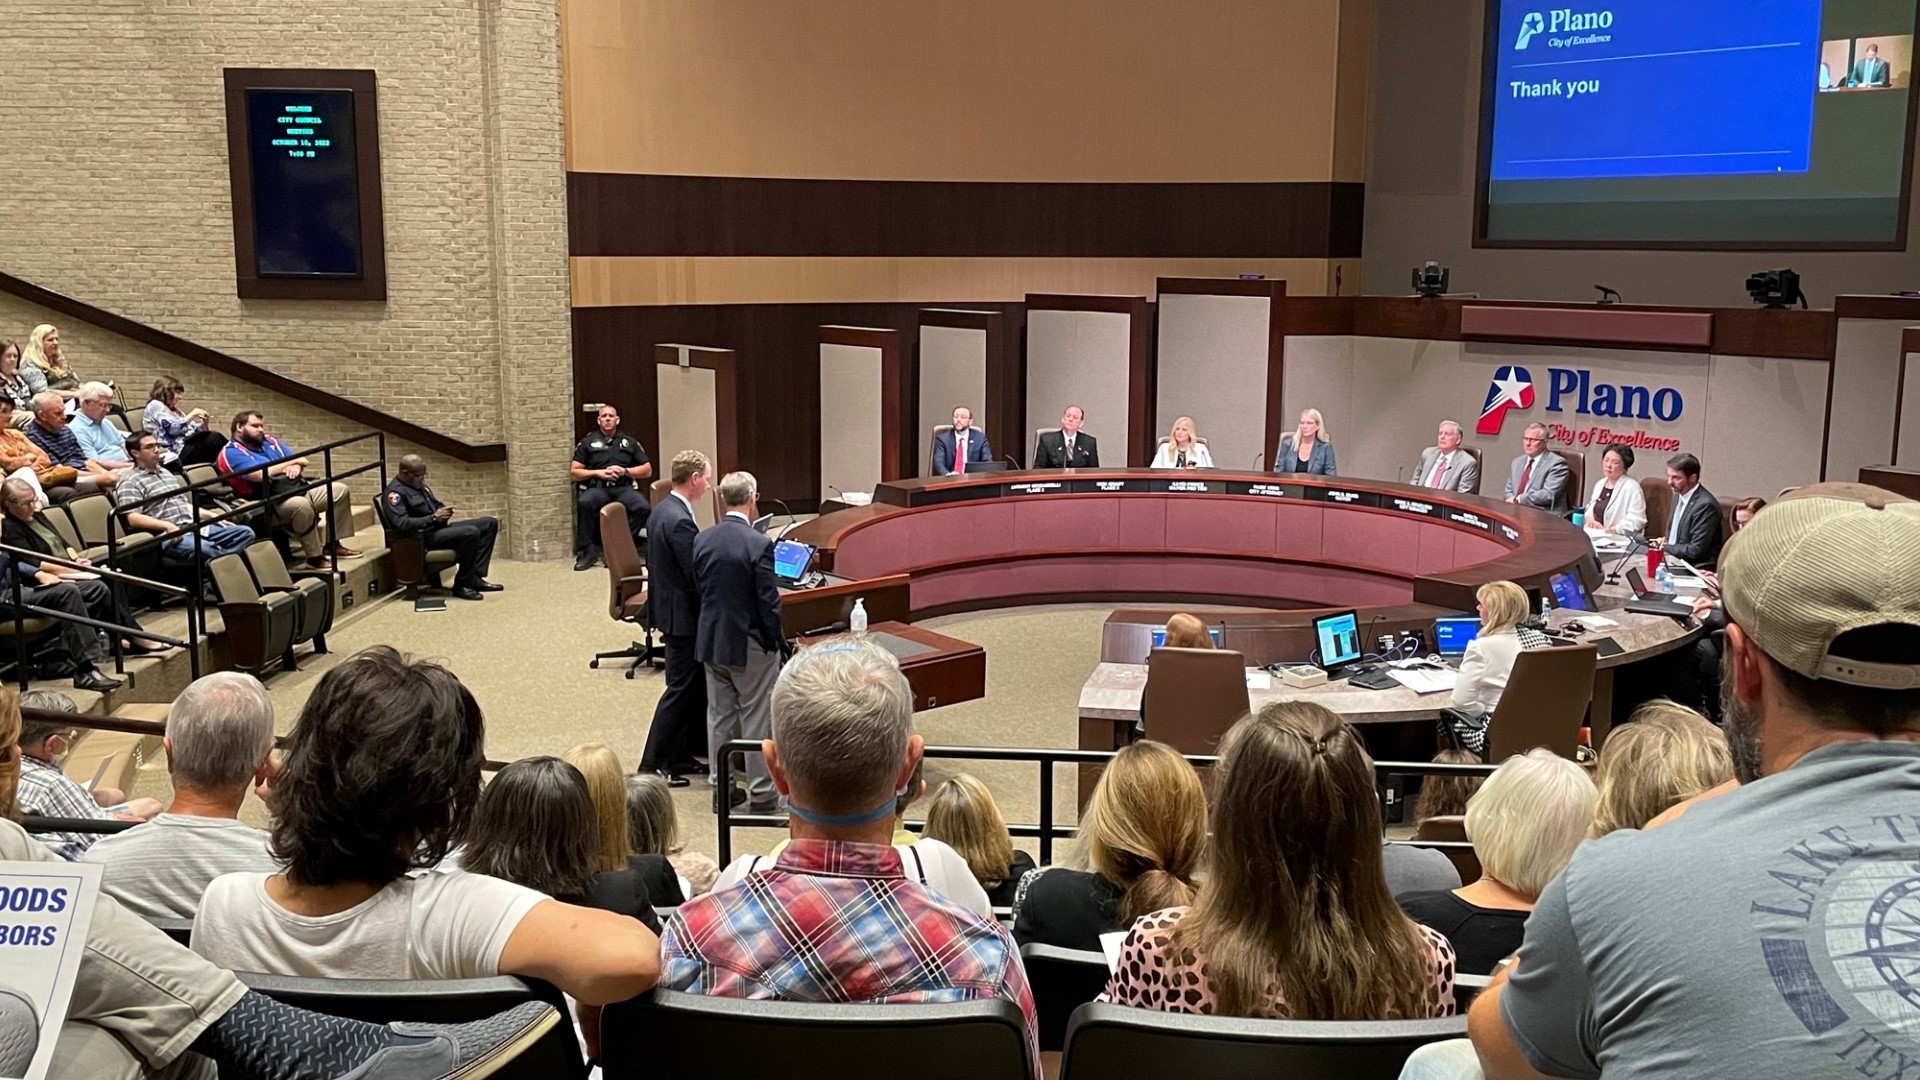 Plano council members weighed how to regulate short-term rentals after an alleged sex trafficking ring was discovered operating inside one last month.